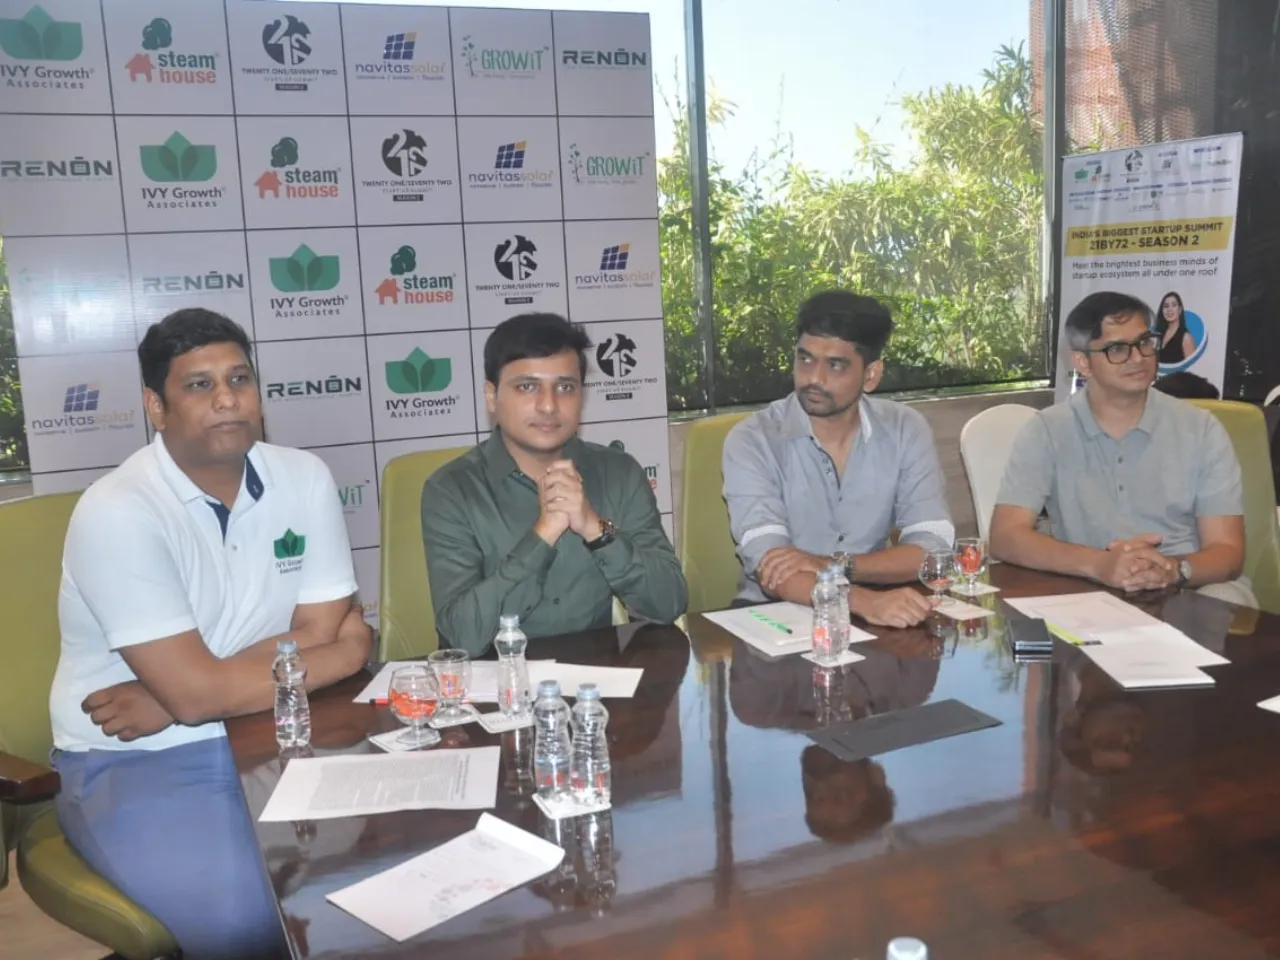 Ivy Growth Associates launches second season of startup summit '21BY72' in Surat